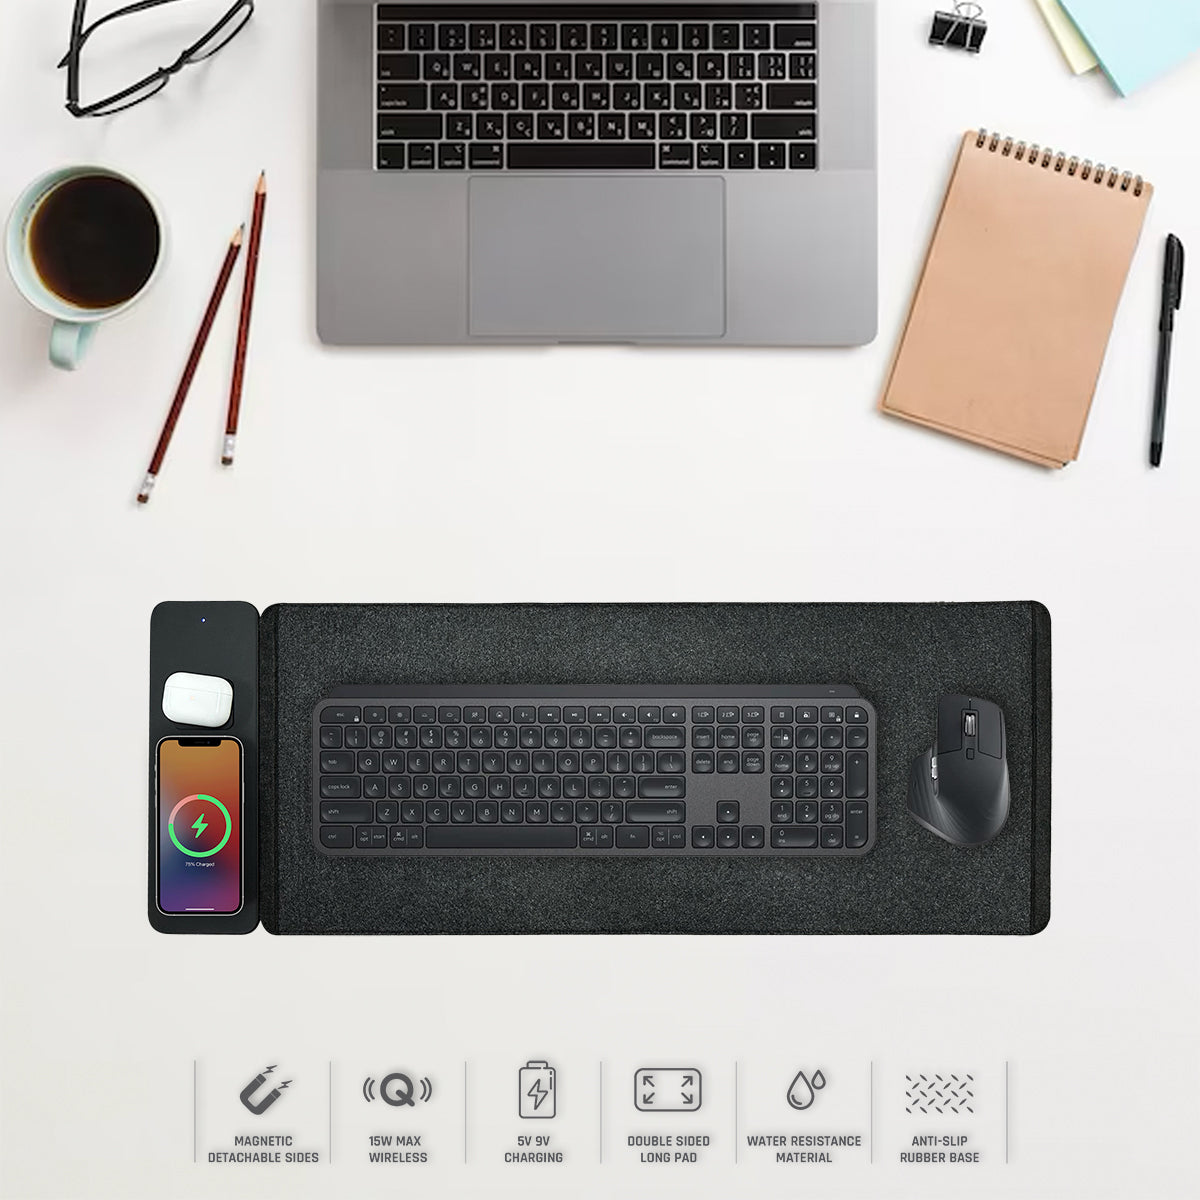 Ergoworks Comfy Desk Mat, Mouse Pad With Detachable Wireless Charging Pad